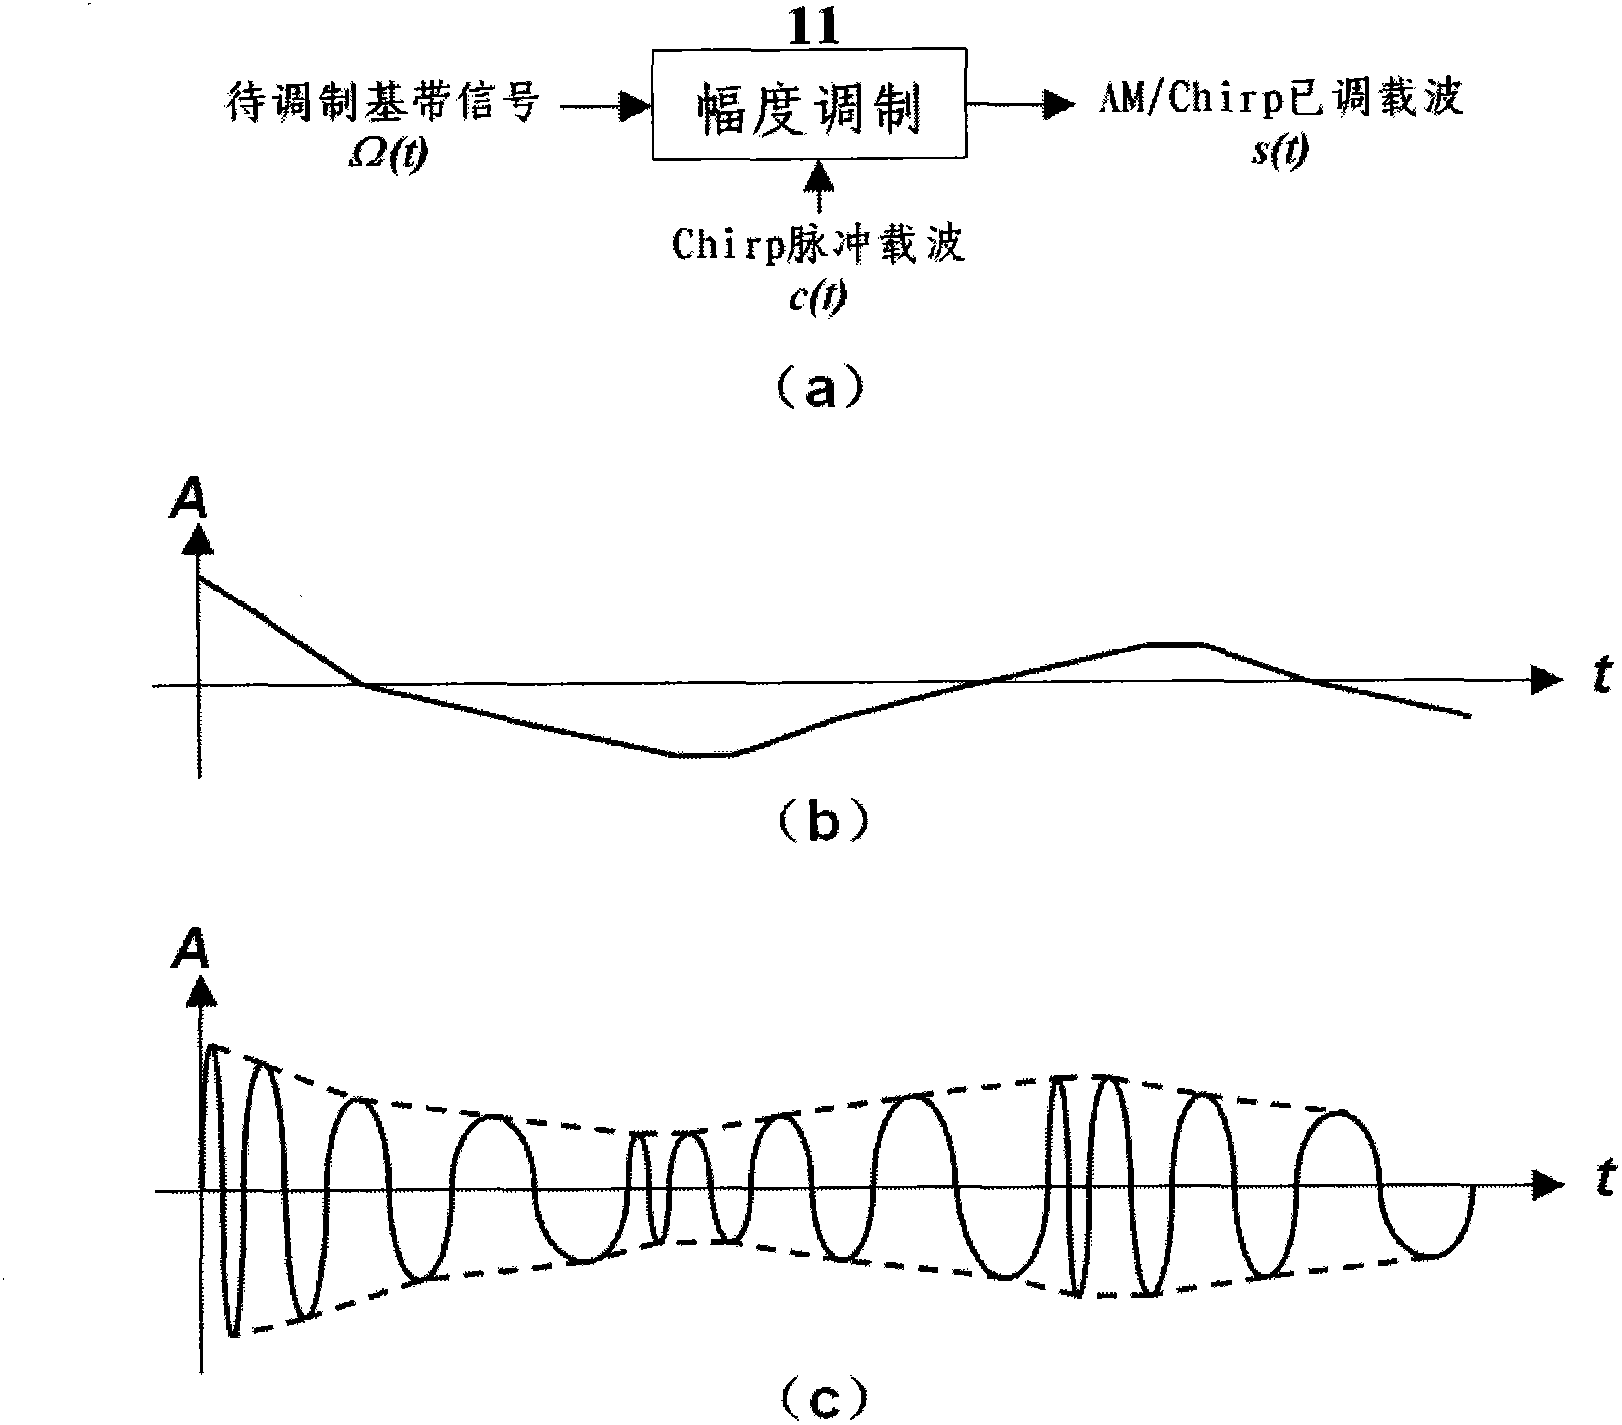 AM/Chirp modulation, realizing device thereof and emergency broadcast and communication system based on common AM/Chirp modulation